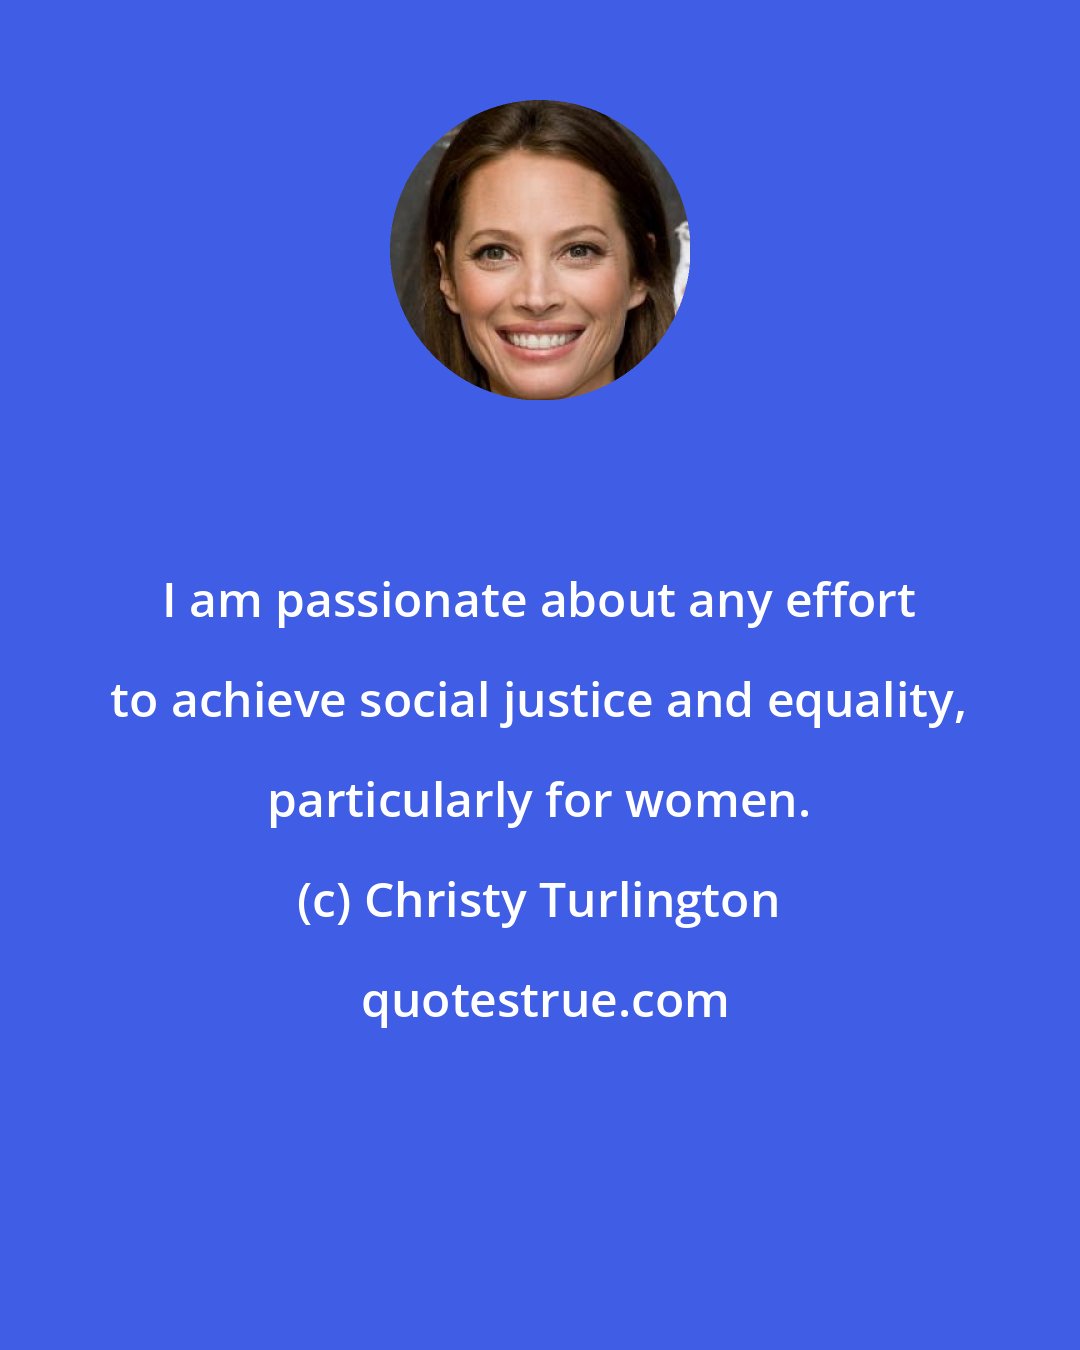 Christy Turlington: I am passionate about any effort to achieve social justice and equality, particularly for women.